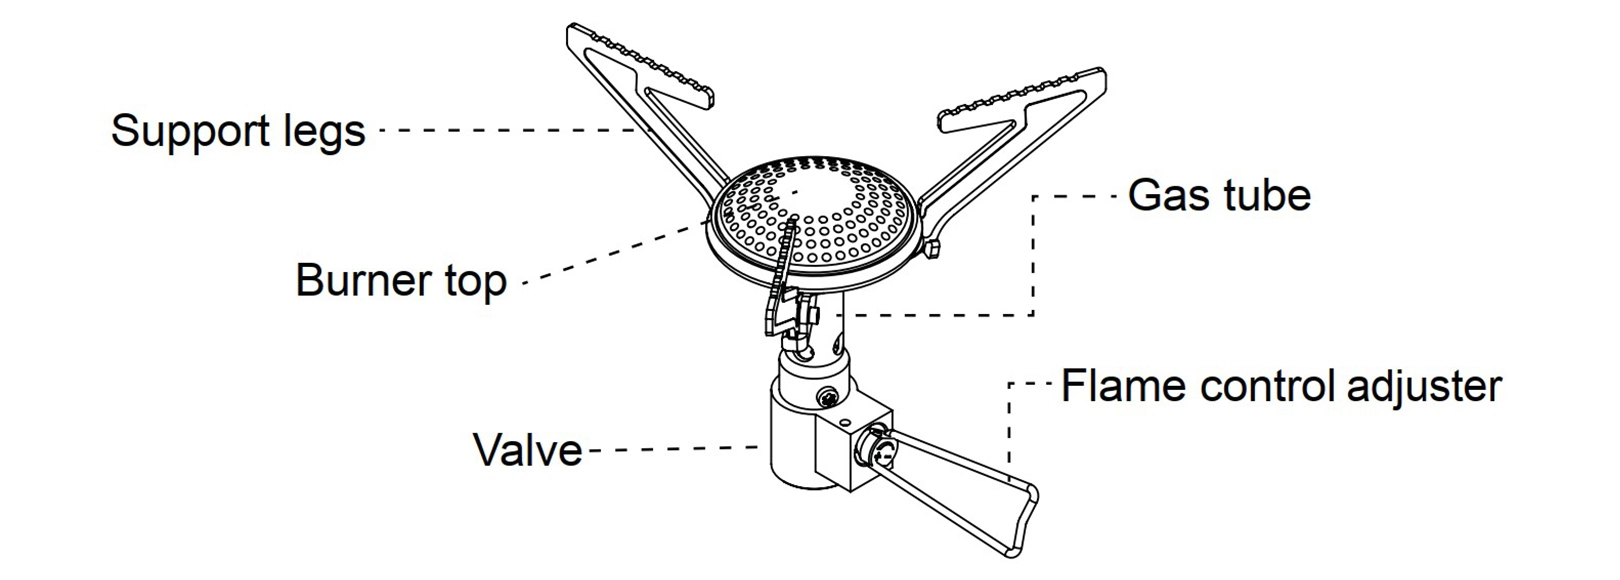 details of Portable Gas-Powered Burner Mountaineering Hiking Stove